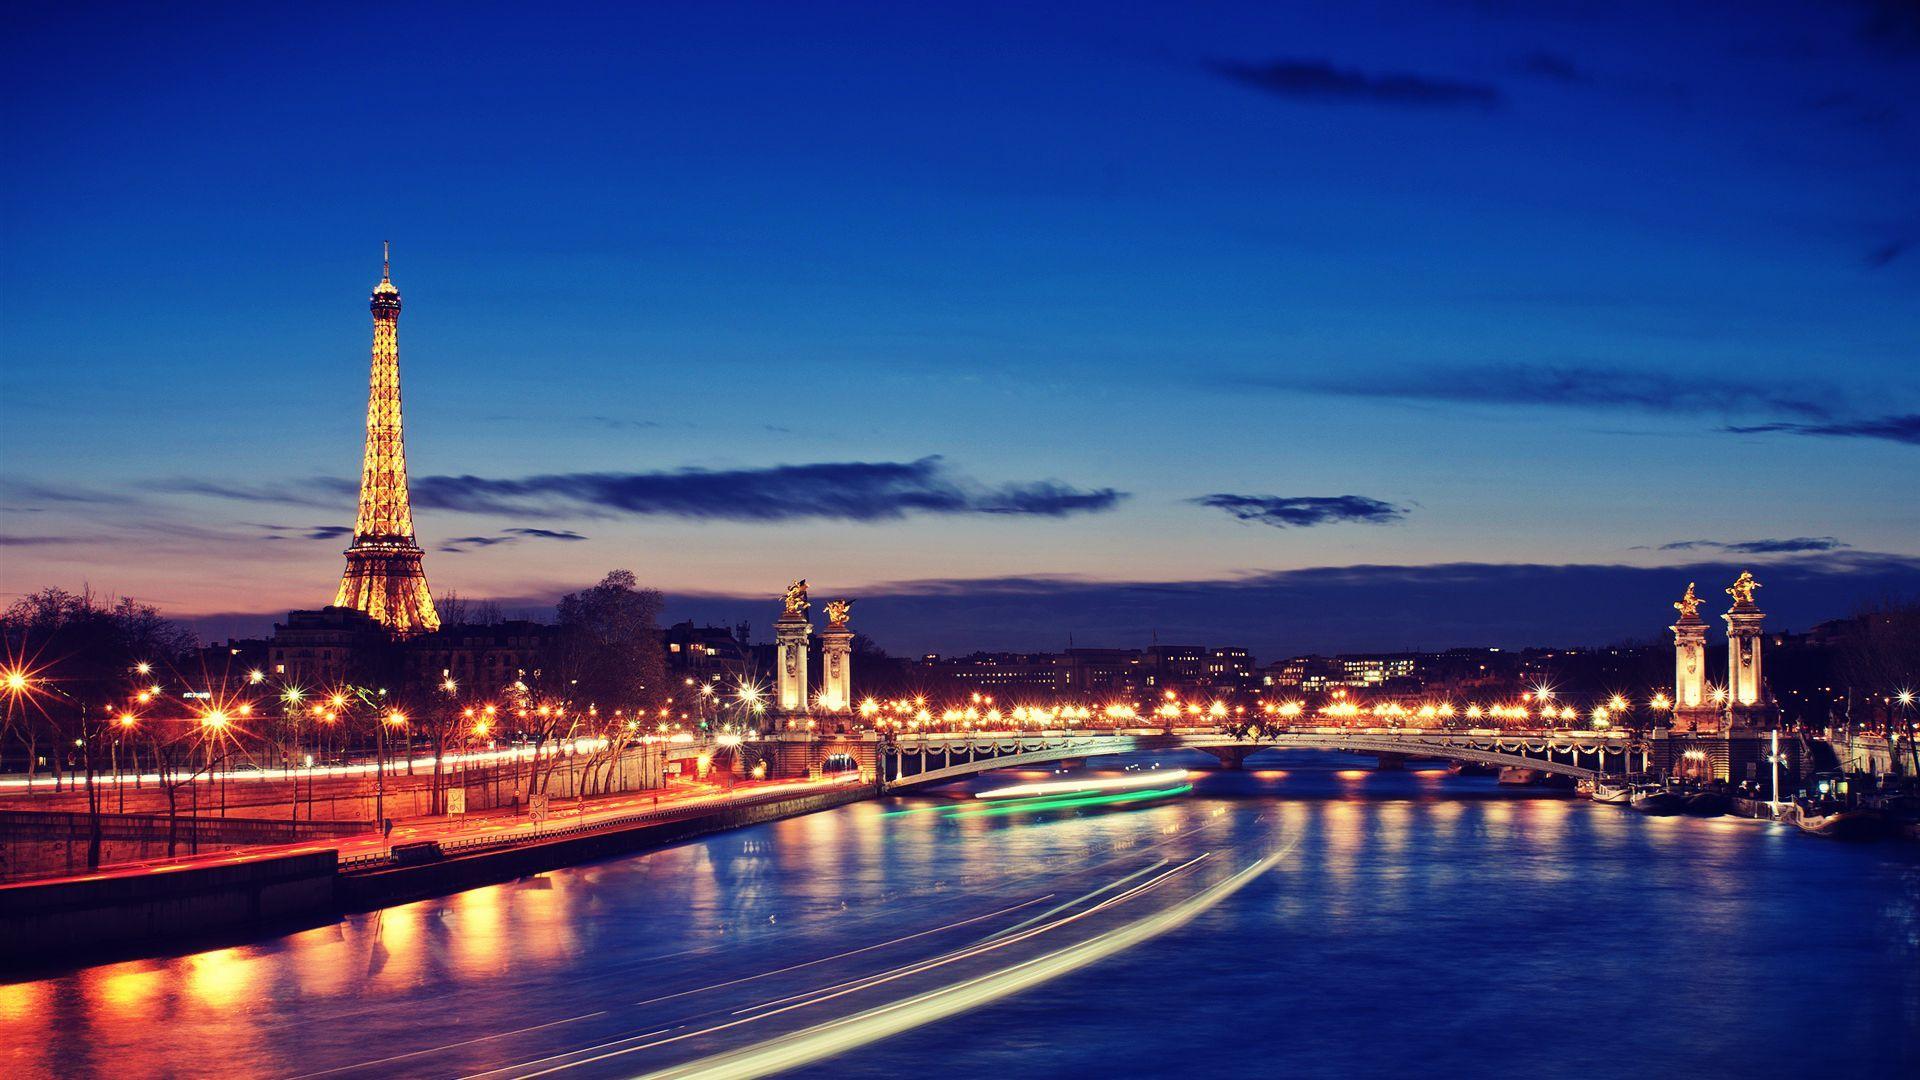 HD Paris Background: The City Of Lights And Romance